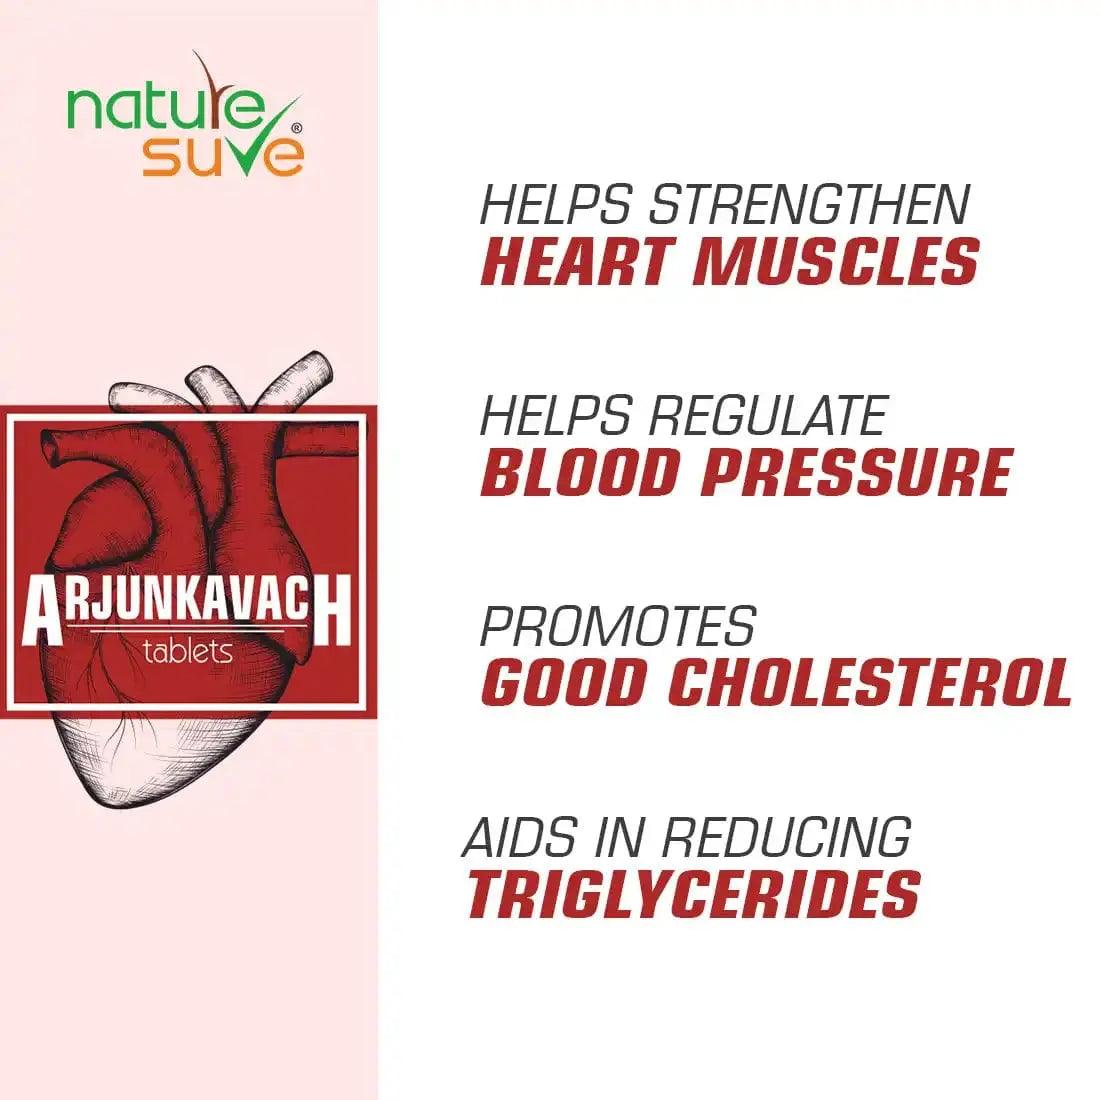 Nature Sure Arjun Kavach Tablets Help Strengthen Heart Muscles, Regulate BP and Promote Good Cholesterol 